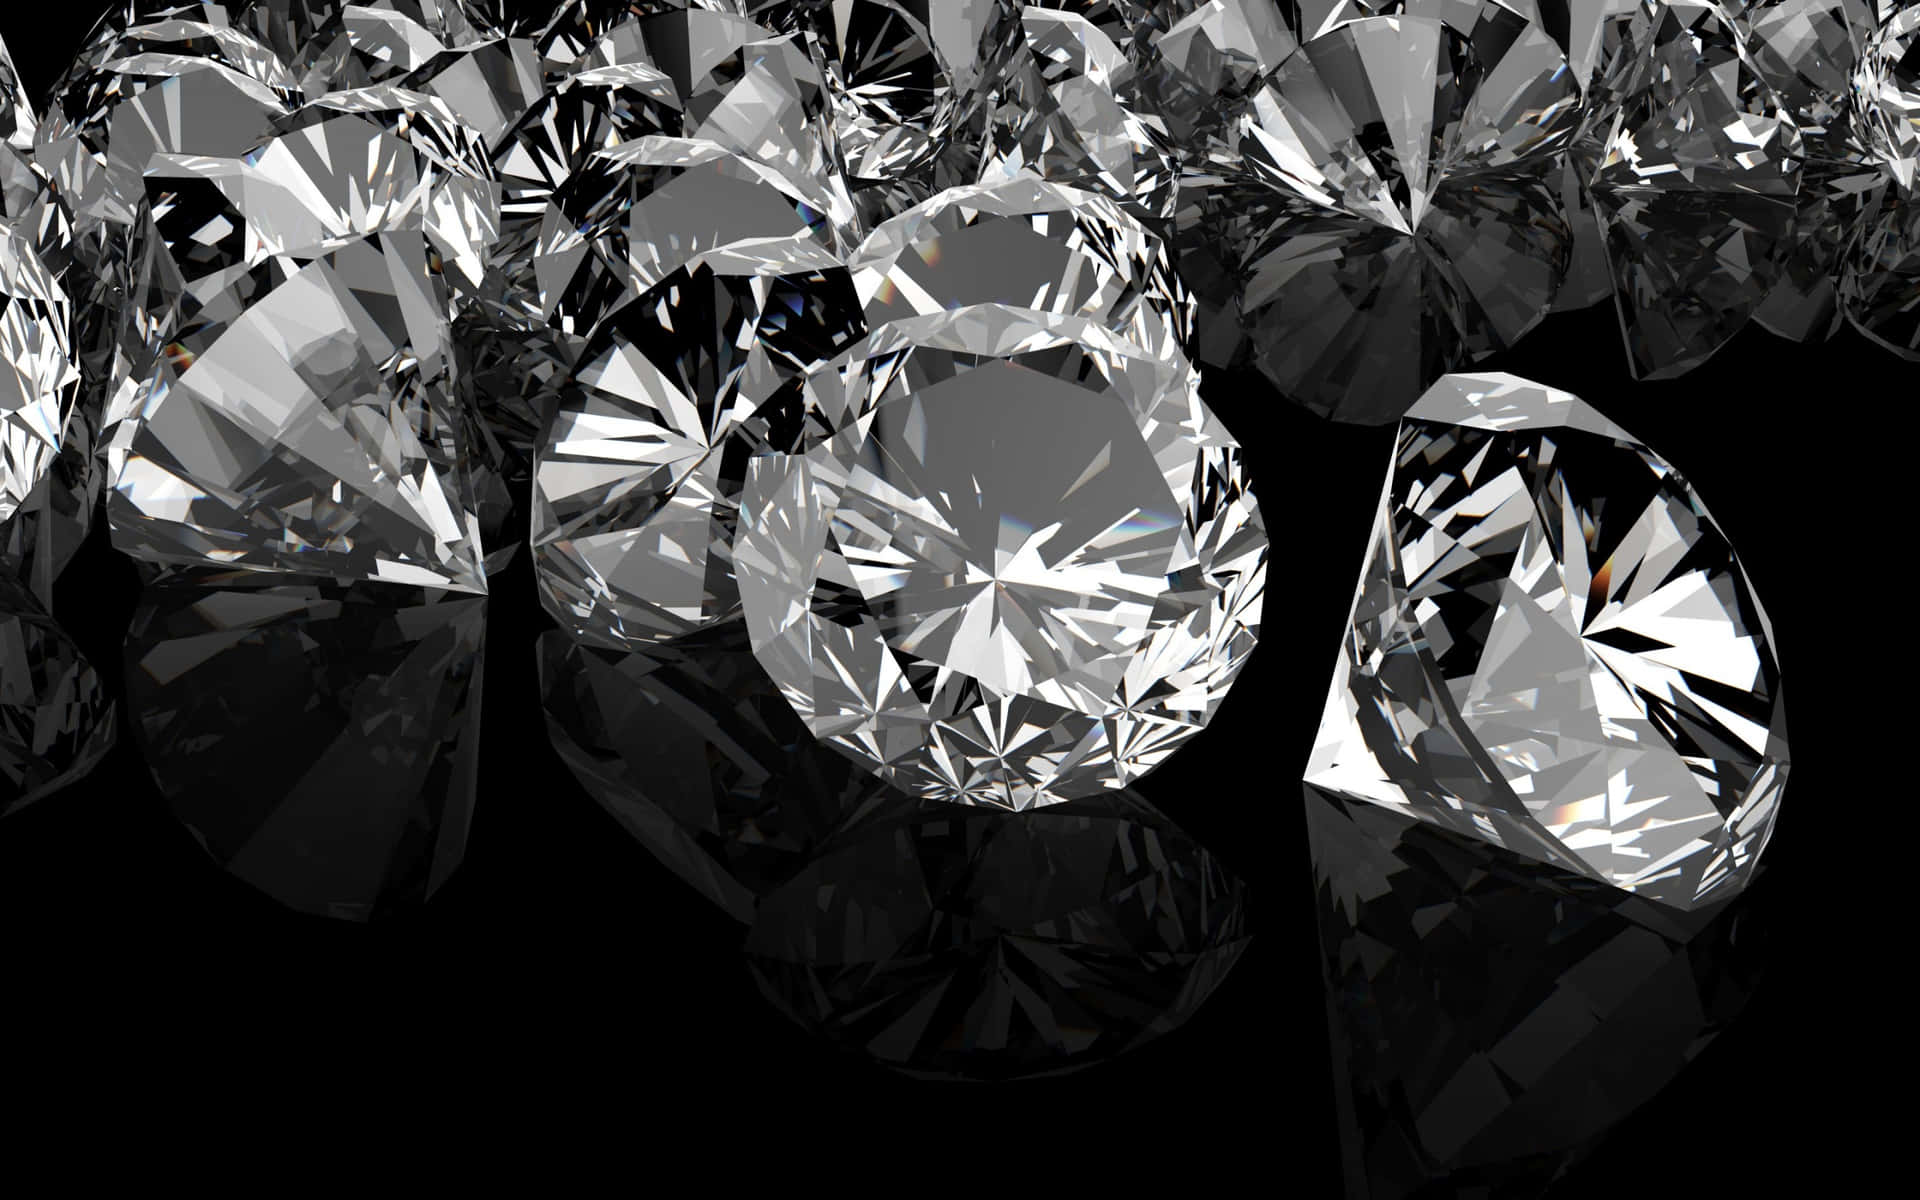 A bright, glimmering diamond shines against a grey background.